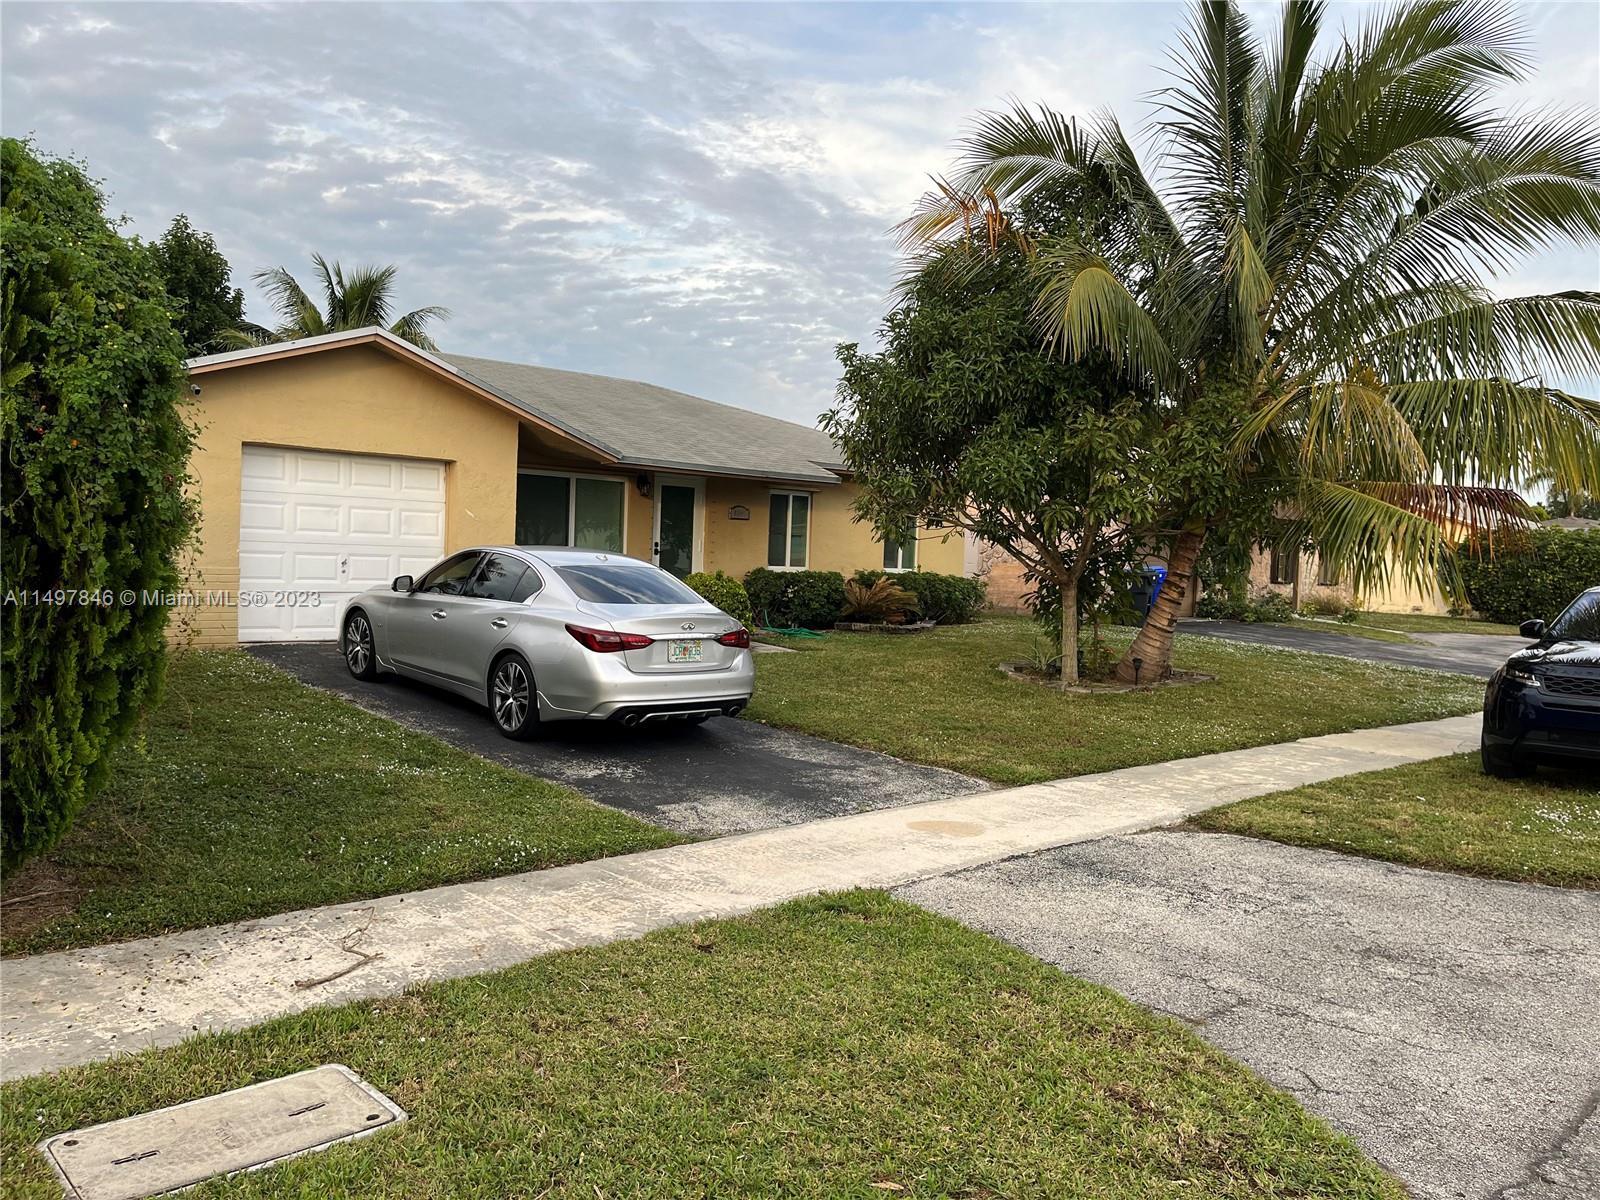 Photo of 8241 SW 9th Pl in North Lauderdale, FL